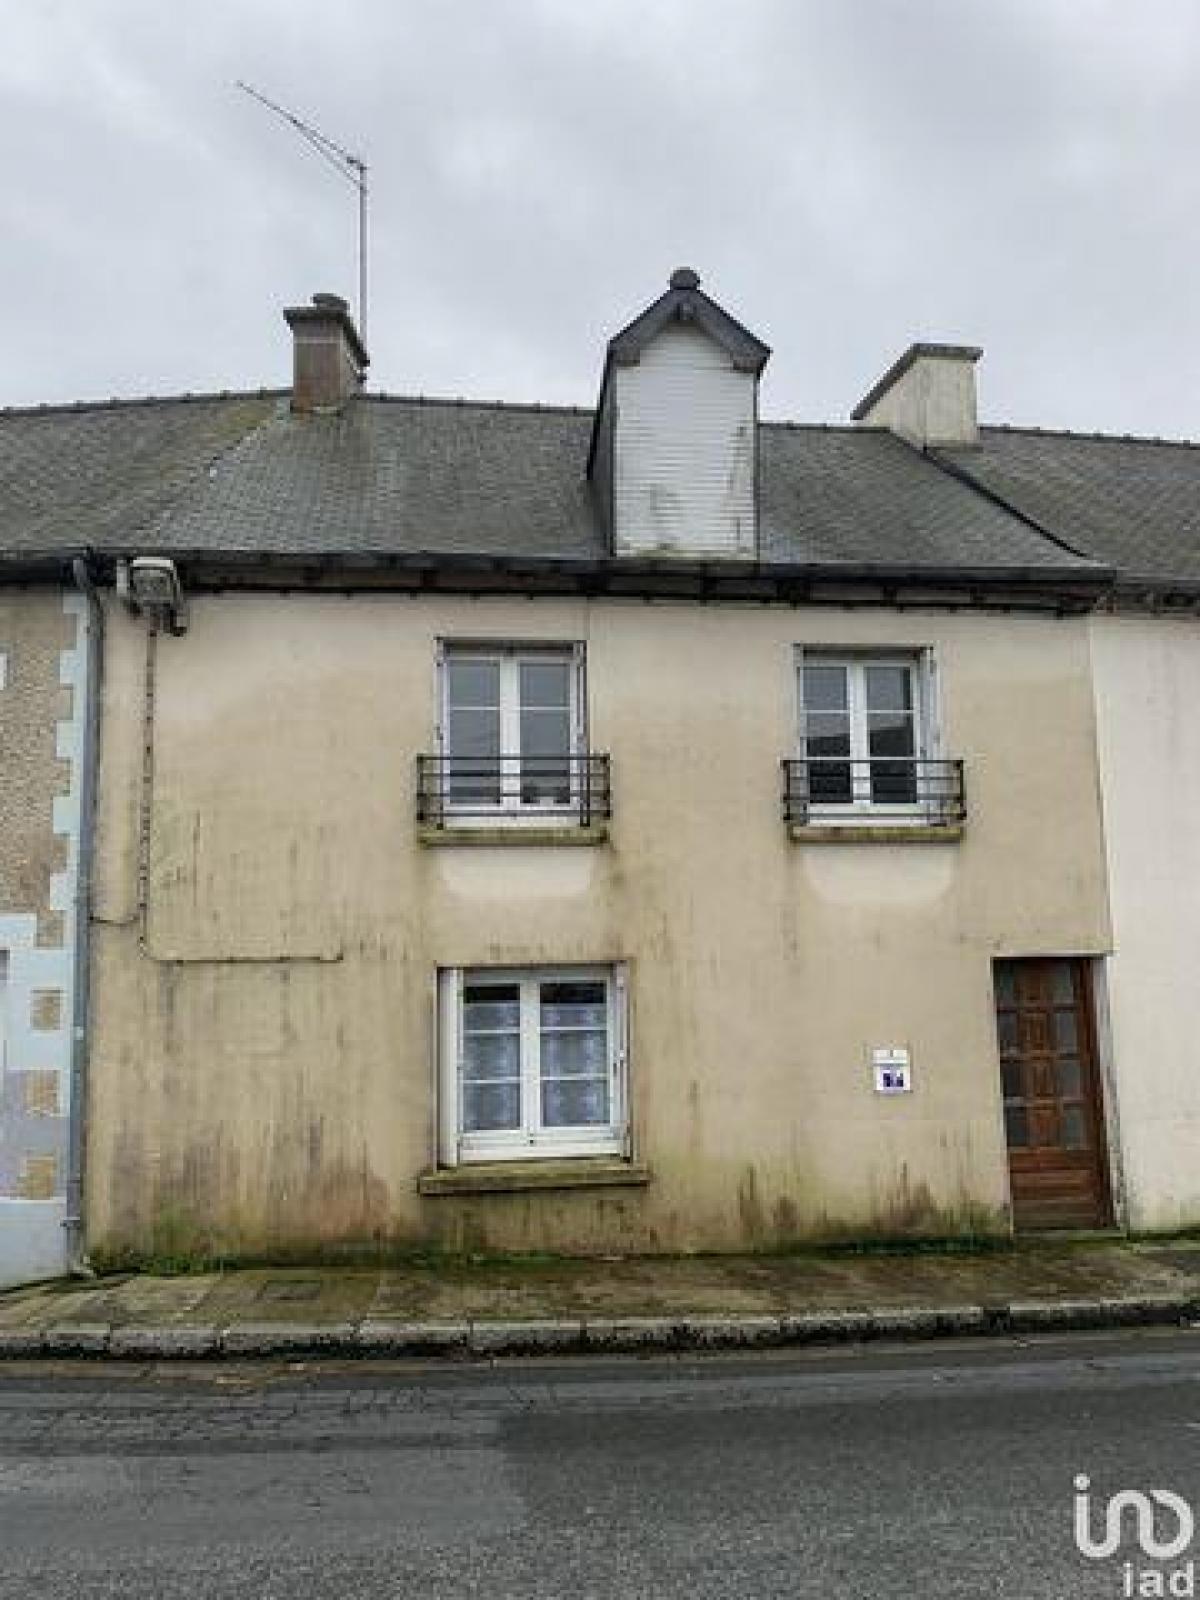 Picture of Home For Sale in Merdrignac, Bretagne, France